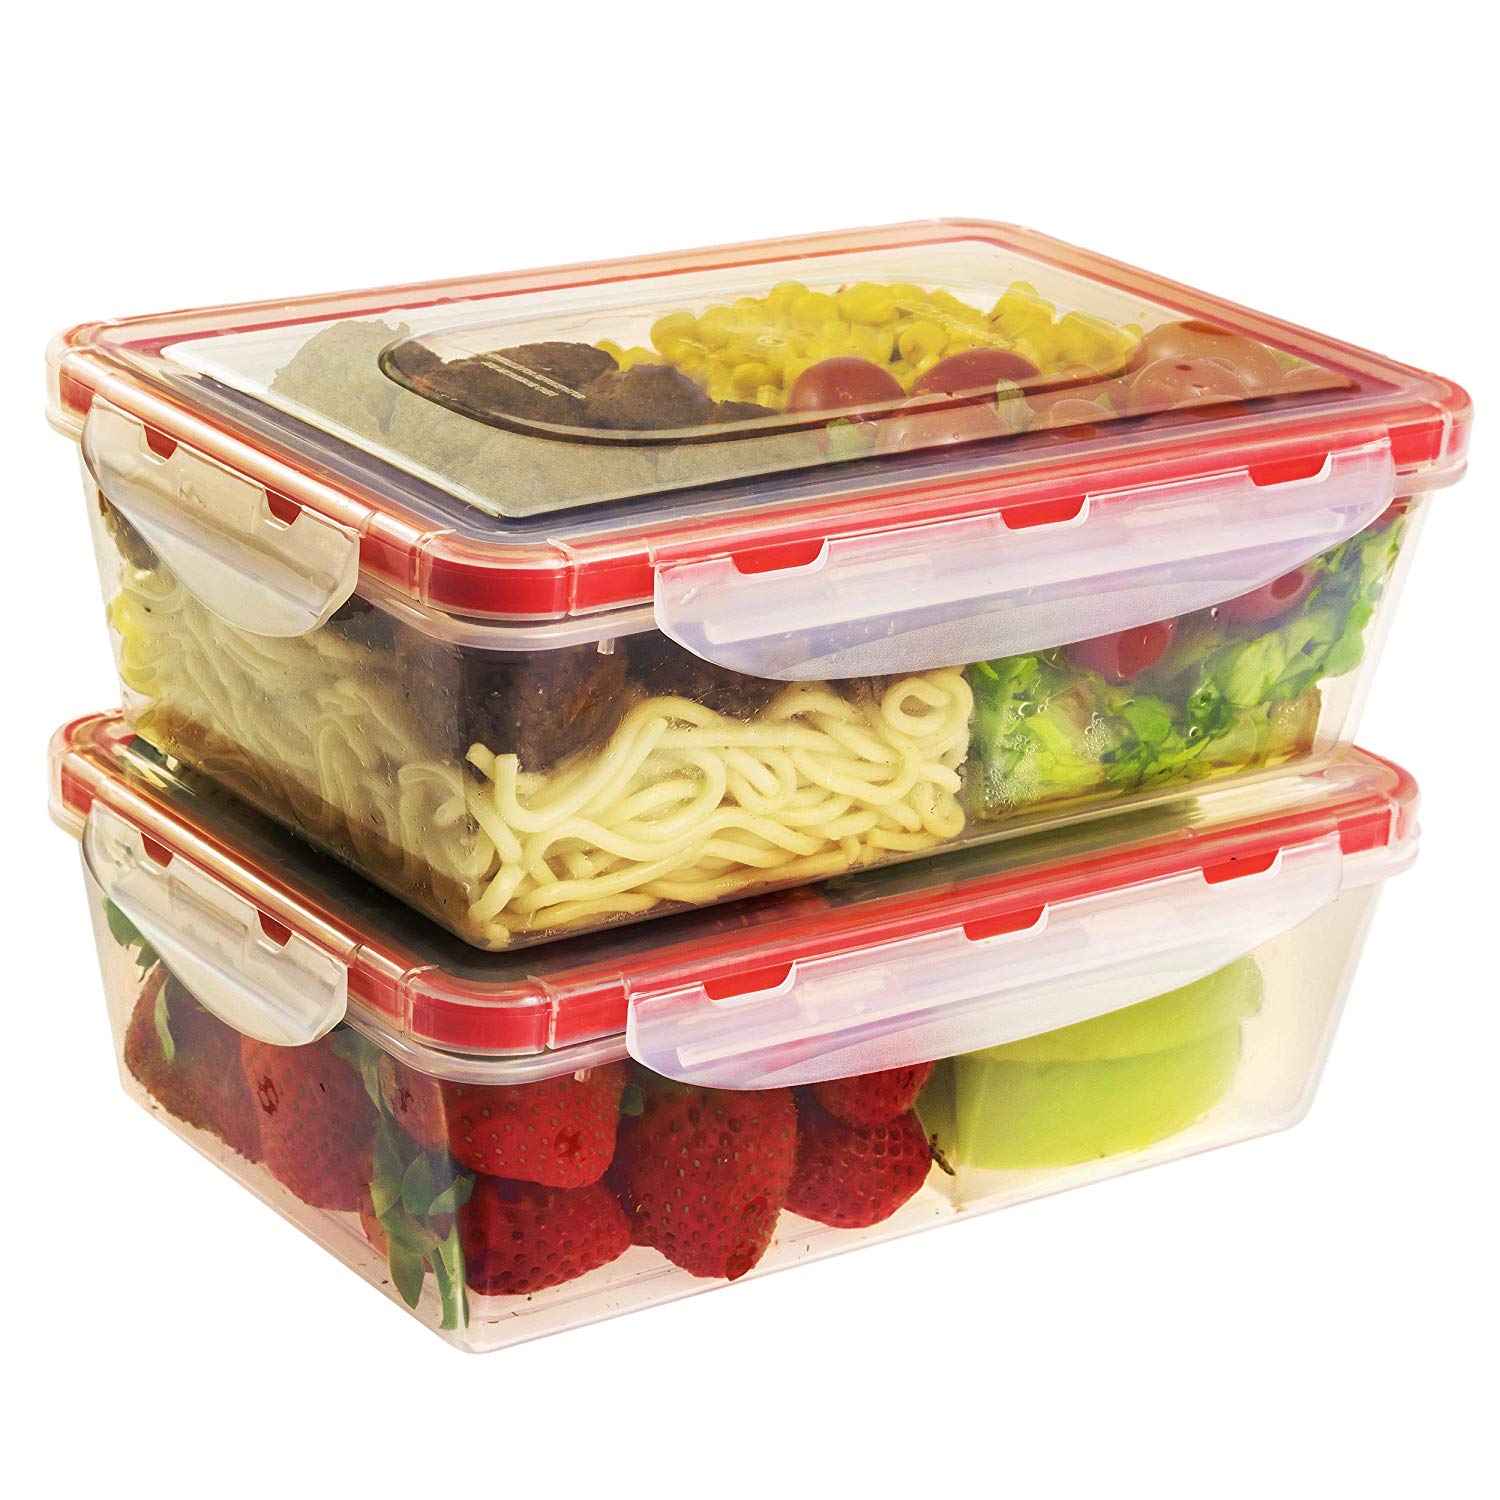 Bento box plastic lunch box portable sealing adult students compartments preservation lunch box